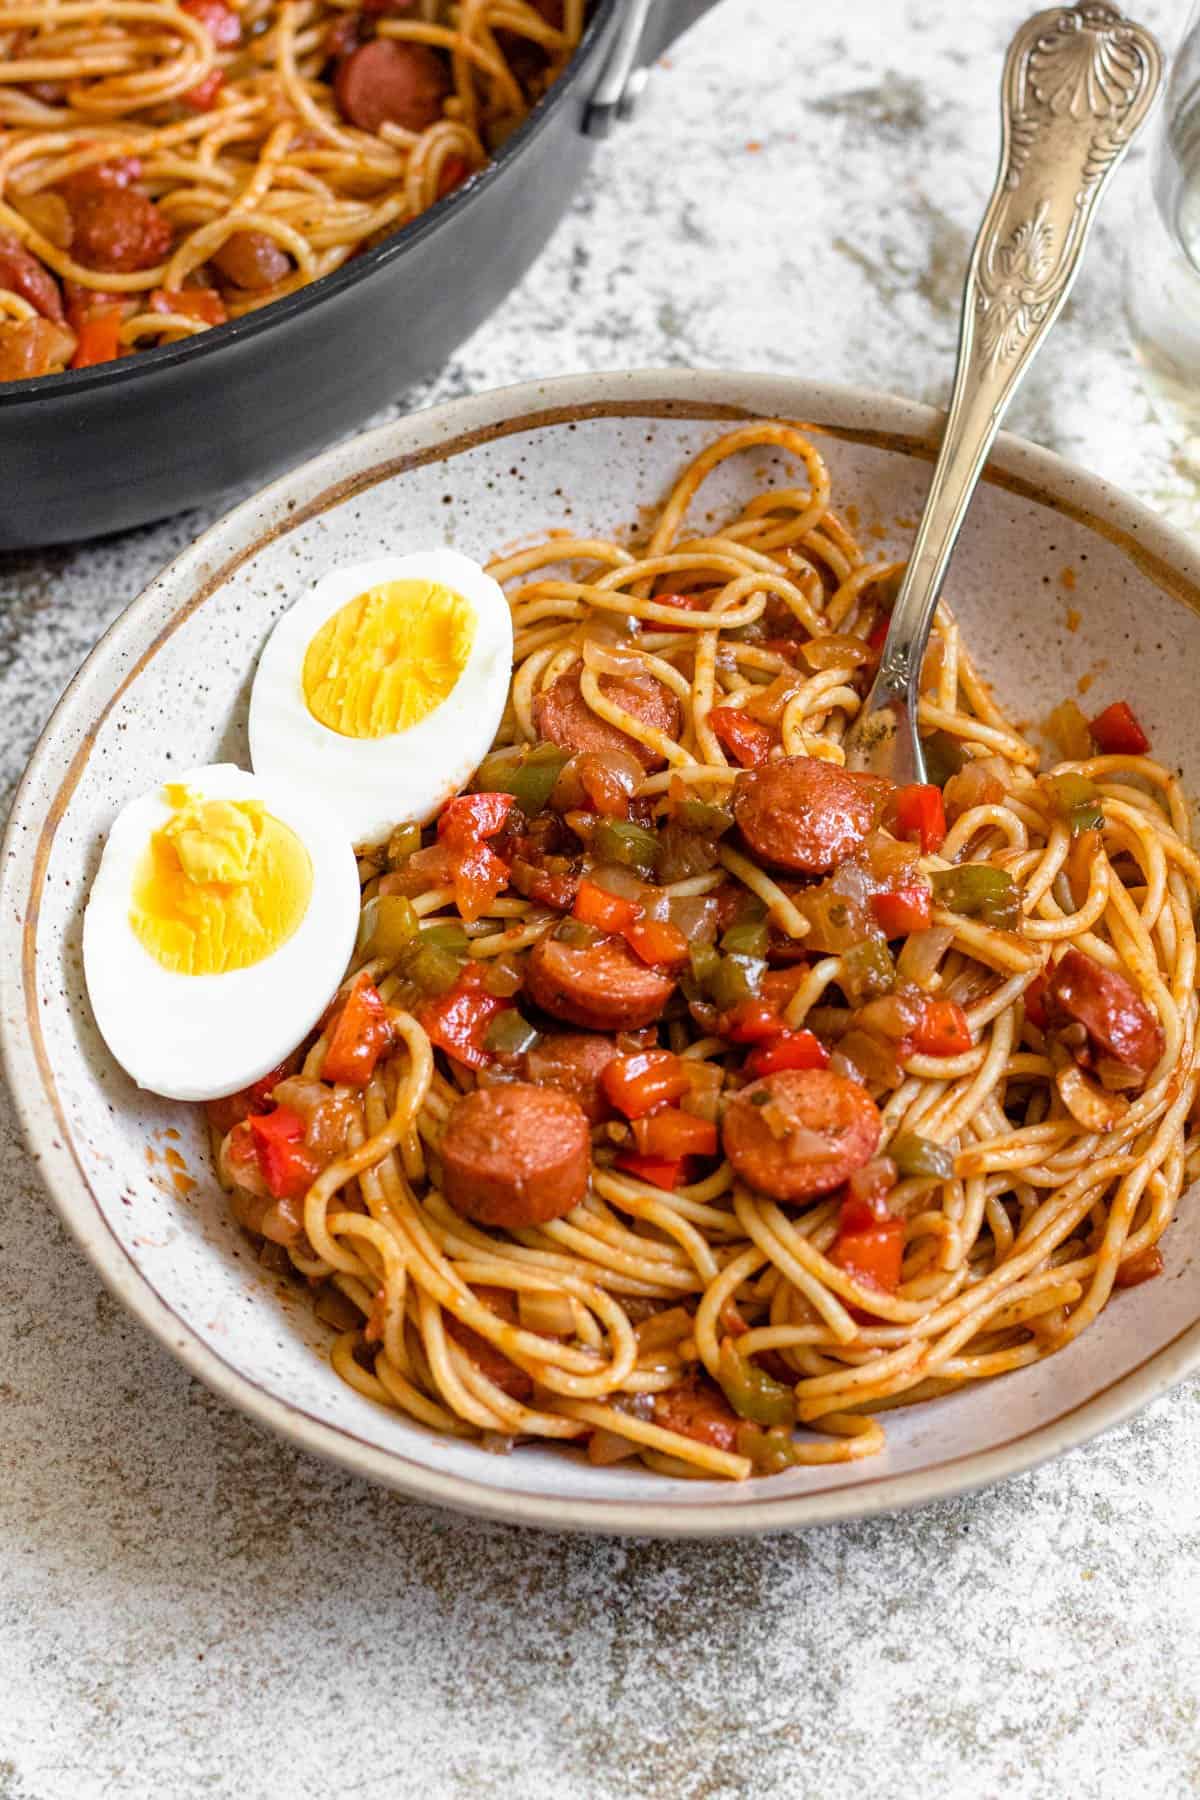 Plate of Haitian spaghetti with a boiled egg cut in half on the plate. 